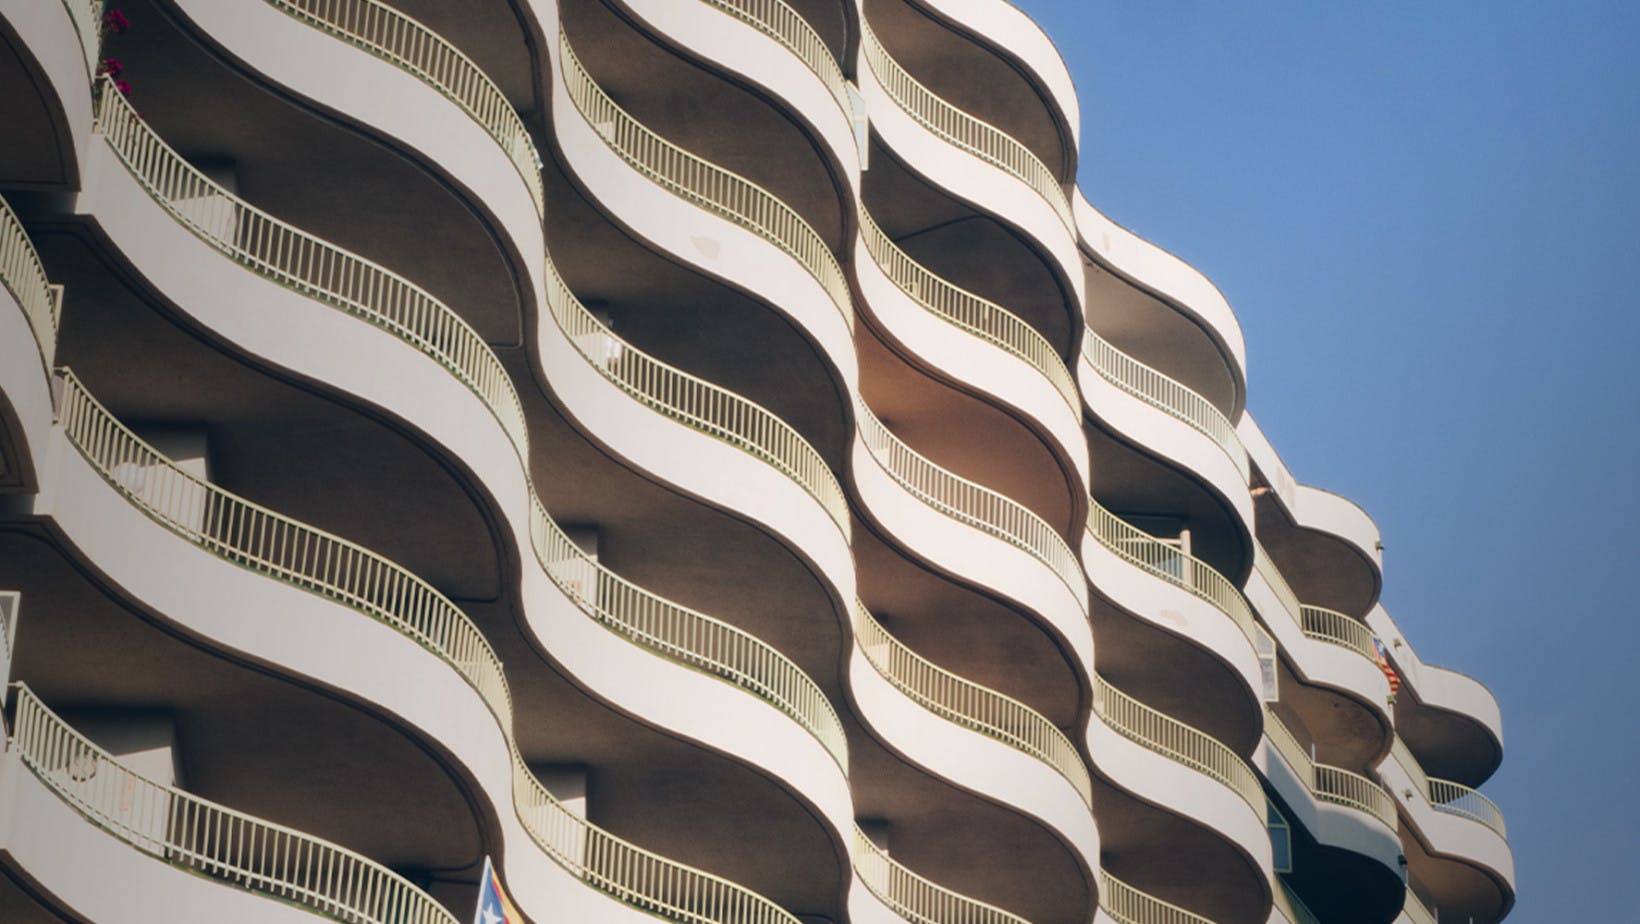 The side of a high rise building that has curving balconies which help represent concavity